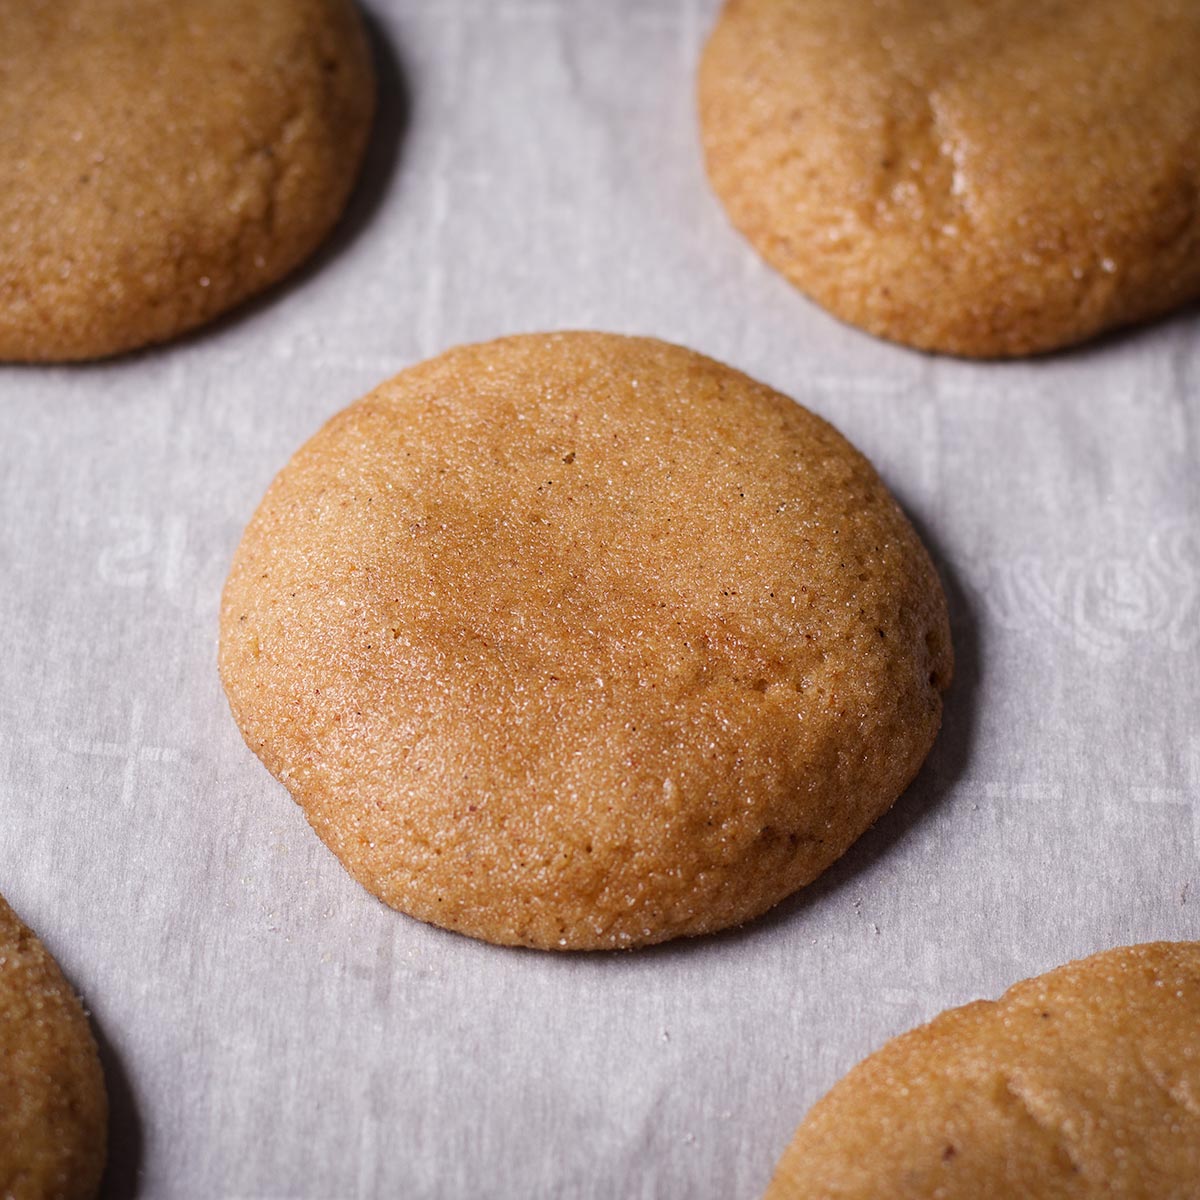 A baking sheet filled with fresh baked brown sugar cookies.